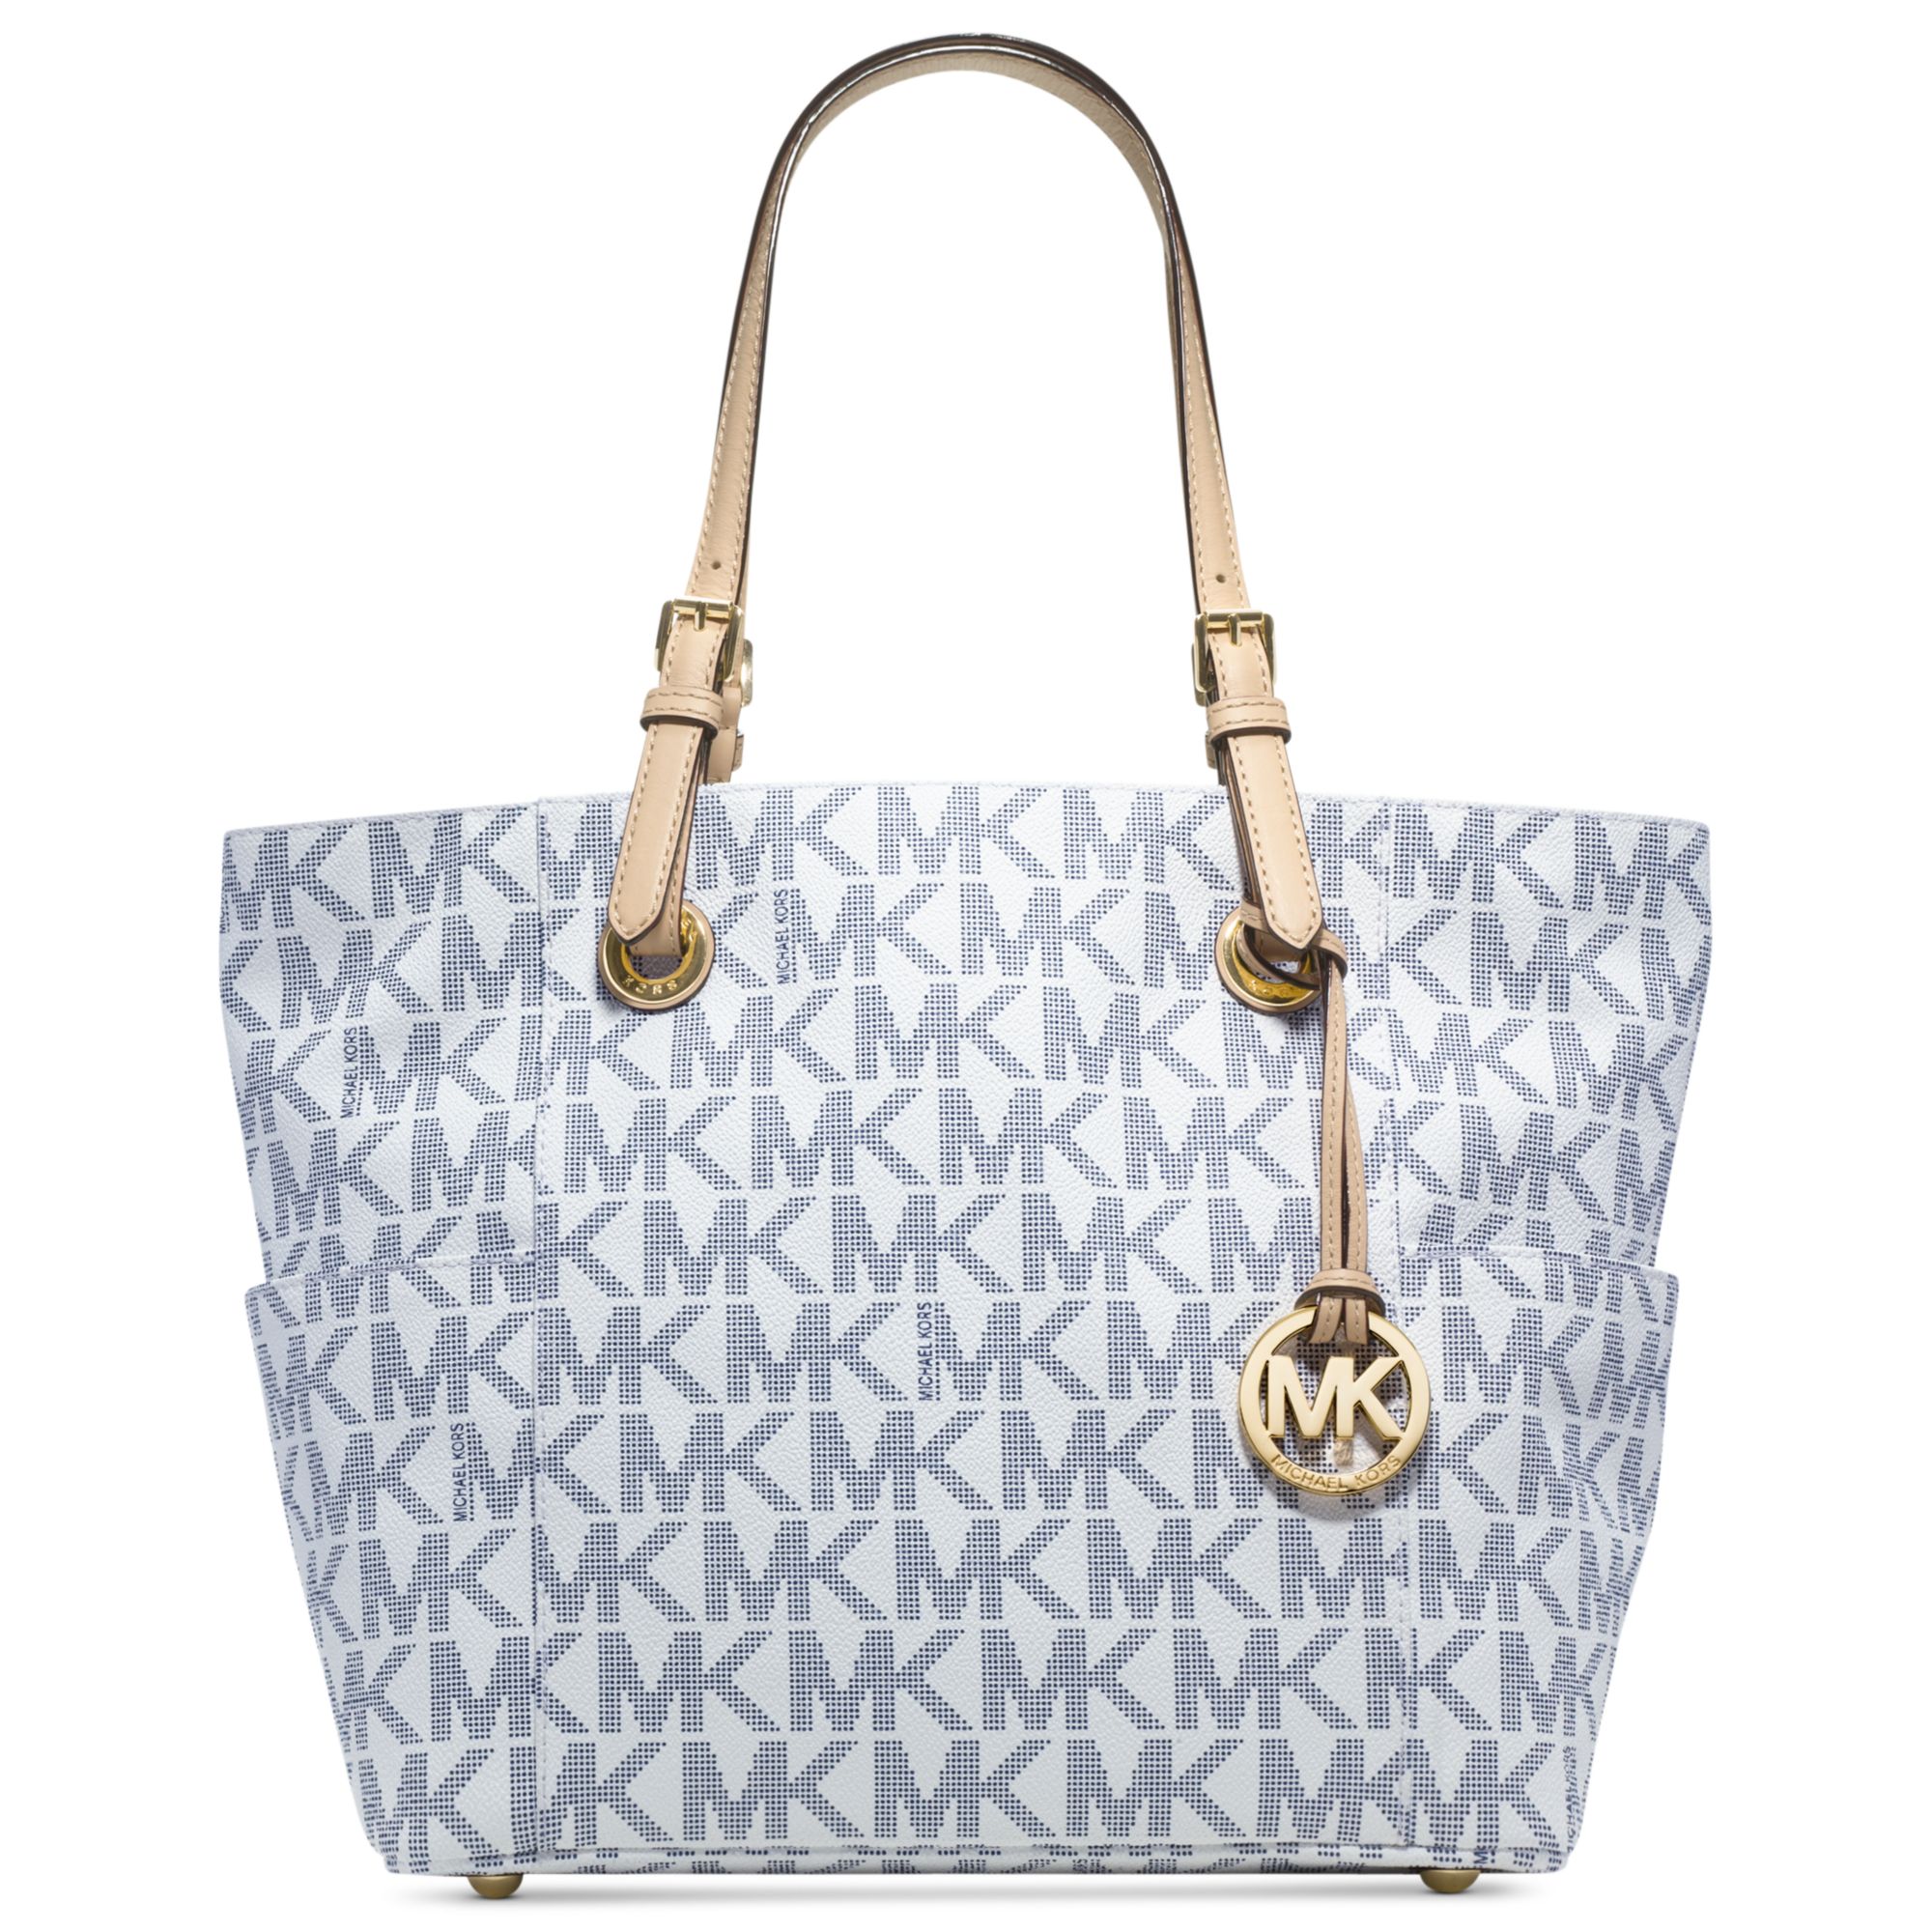 Michael Kors Signature Tote in White/Navy (White) - Lyst